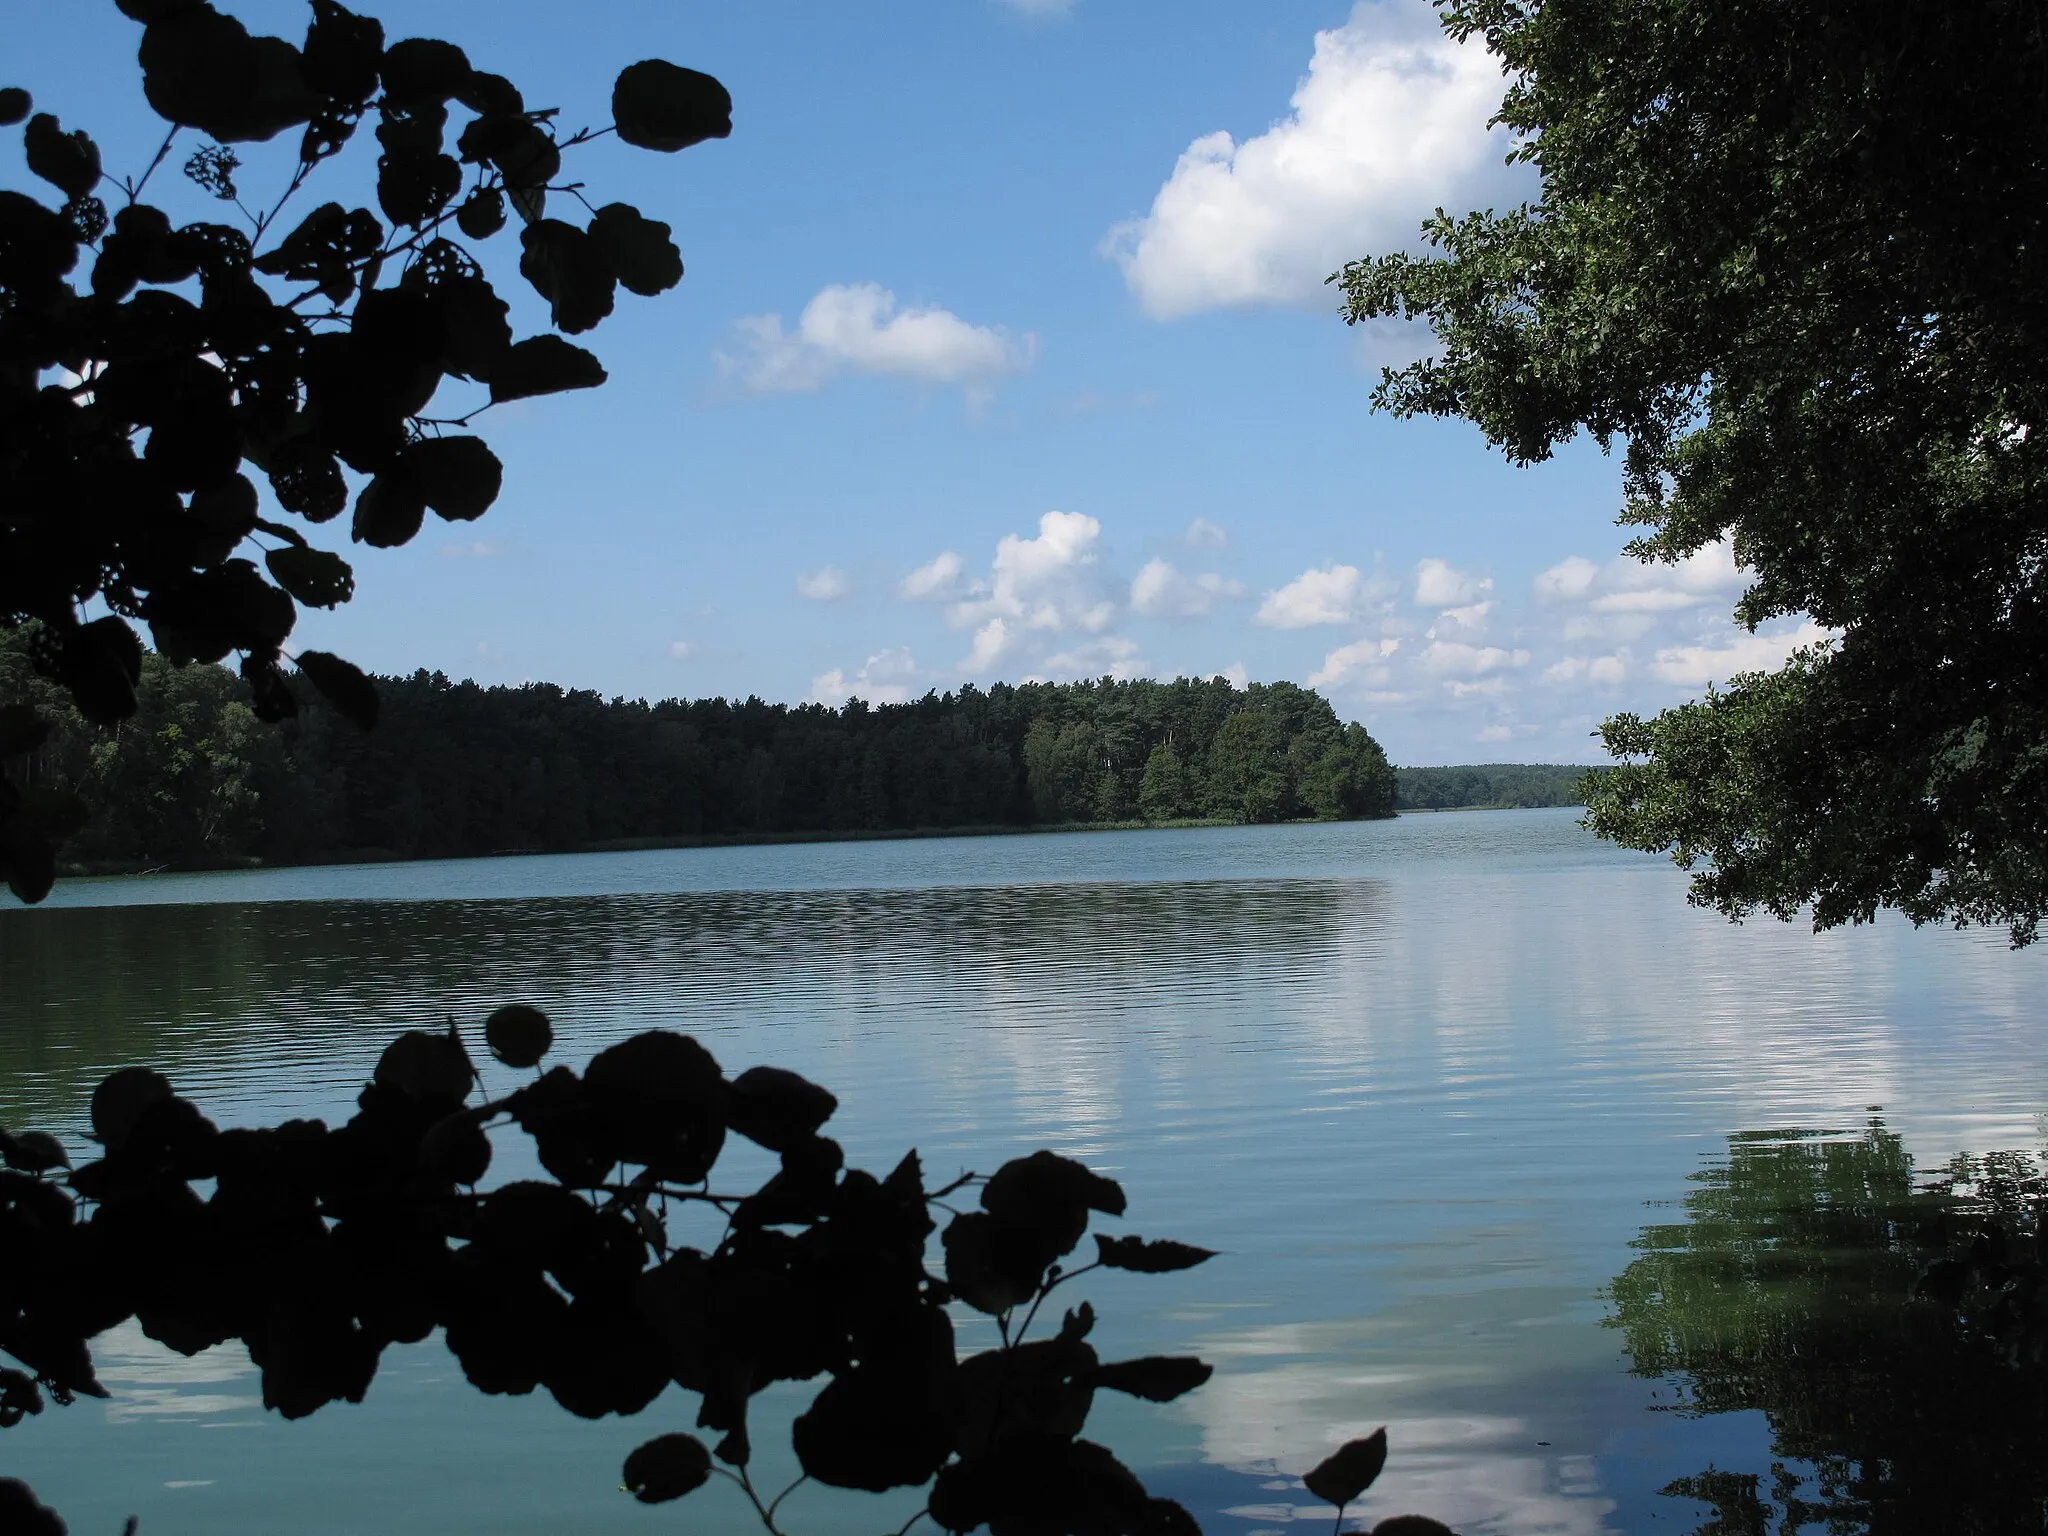 Photo showing: The Oelsener See is a lake in the District Oder-Spree, Brandenburg, Germany. The lake covers 0,94 km² and is situated in the Schlaube Valley Nature Park.